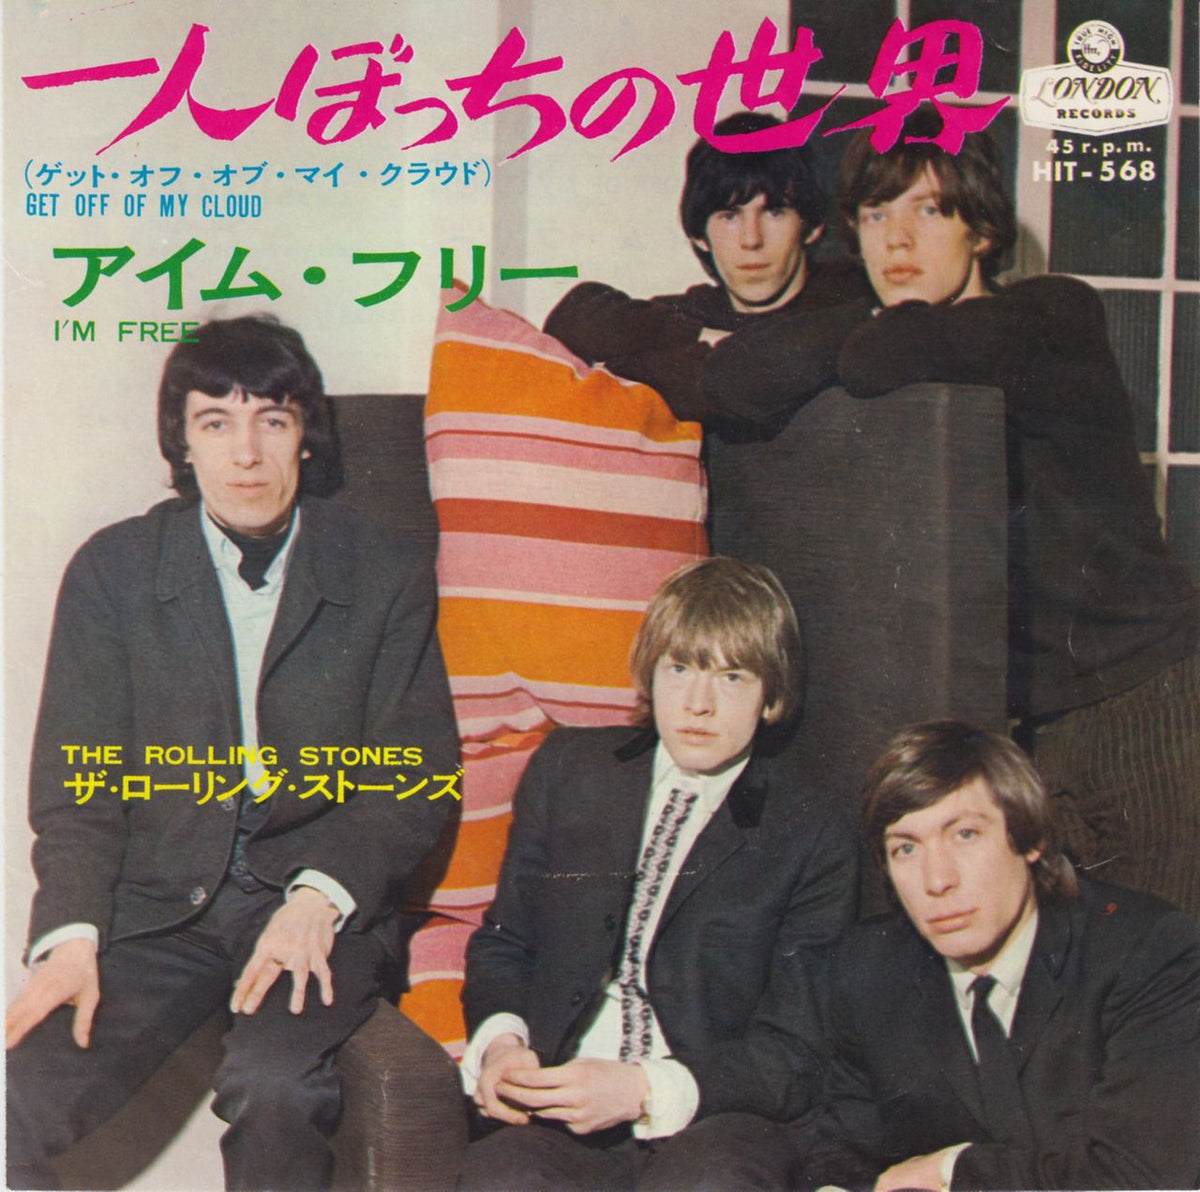 The Rolling Stones Get Off Of My Cloud - 1st ¥370 Japanese 7